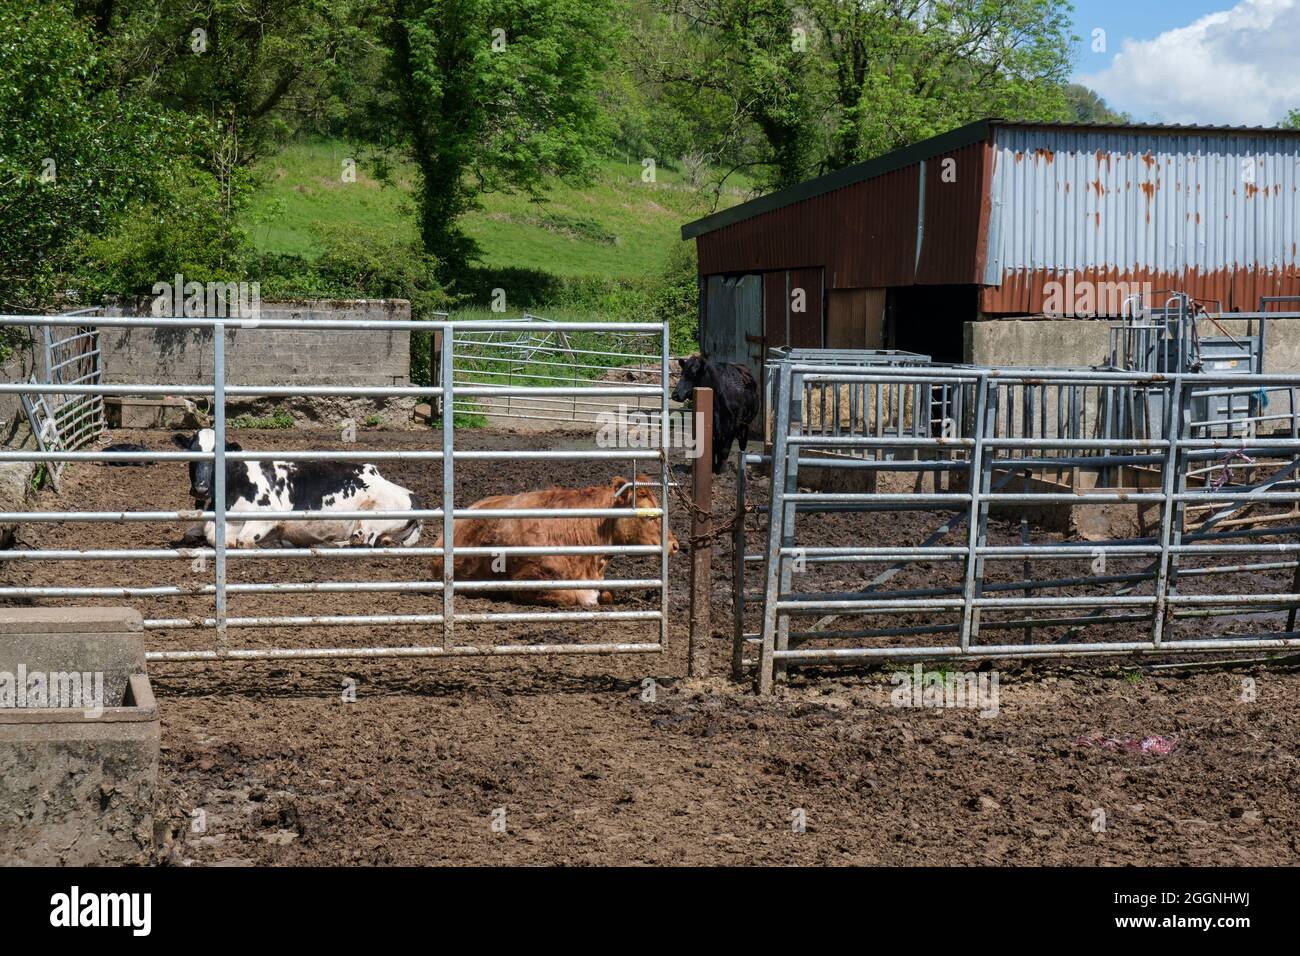 Small rural farmyard with two cattle resting Stock Photo